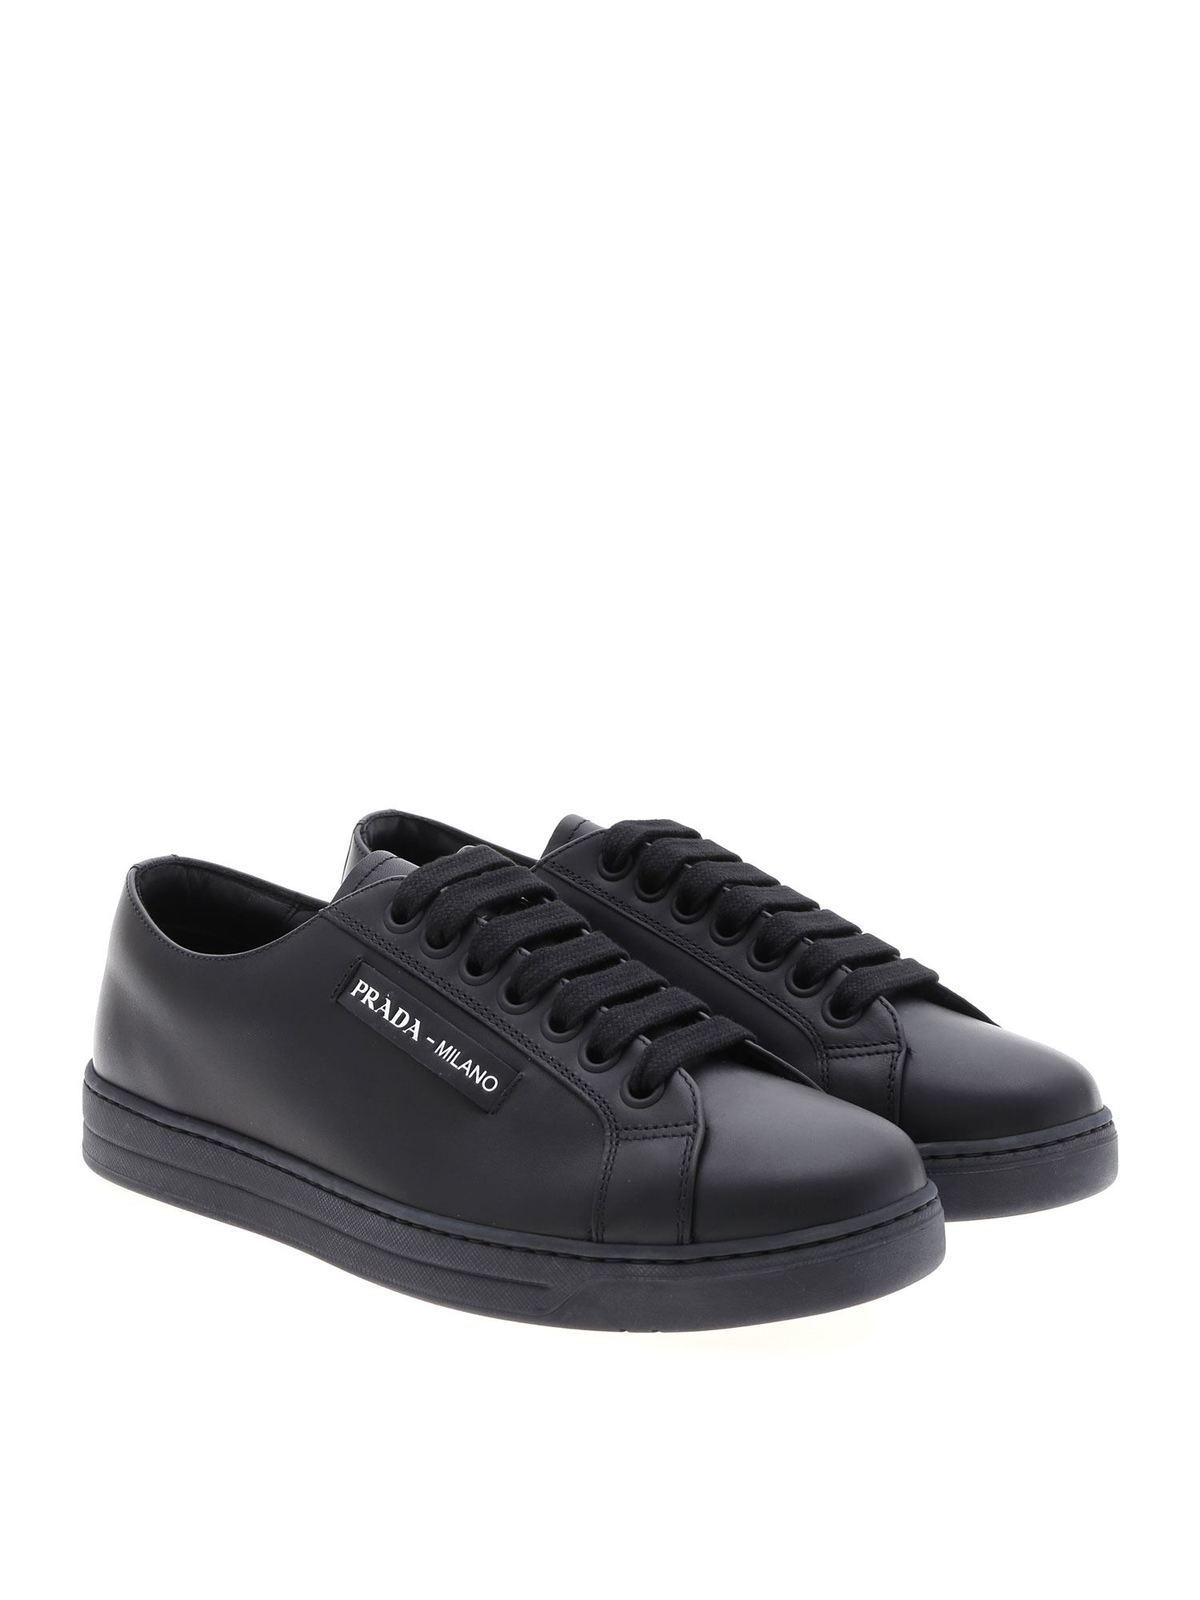 Trainers Prada Sport - Sneakers in black real leather - 4E33196DTF0002